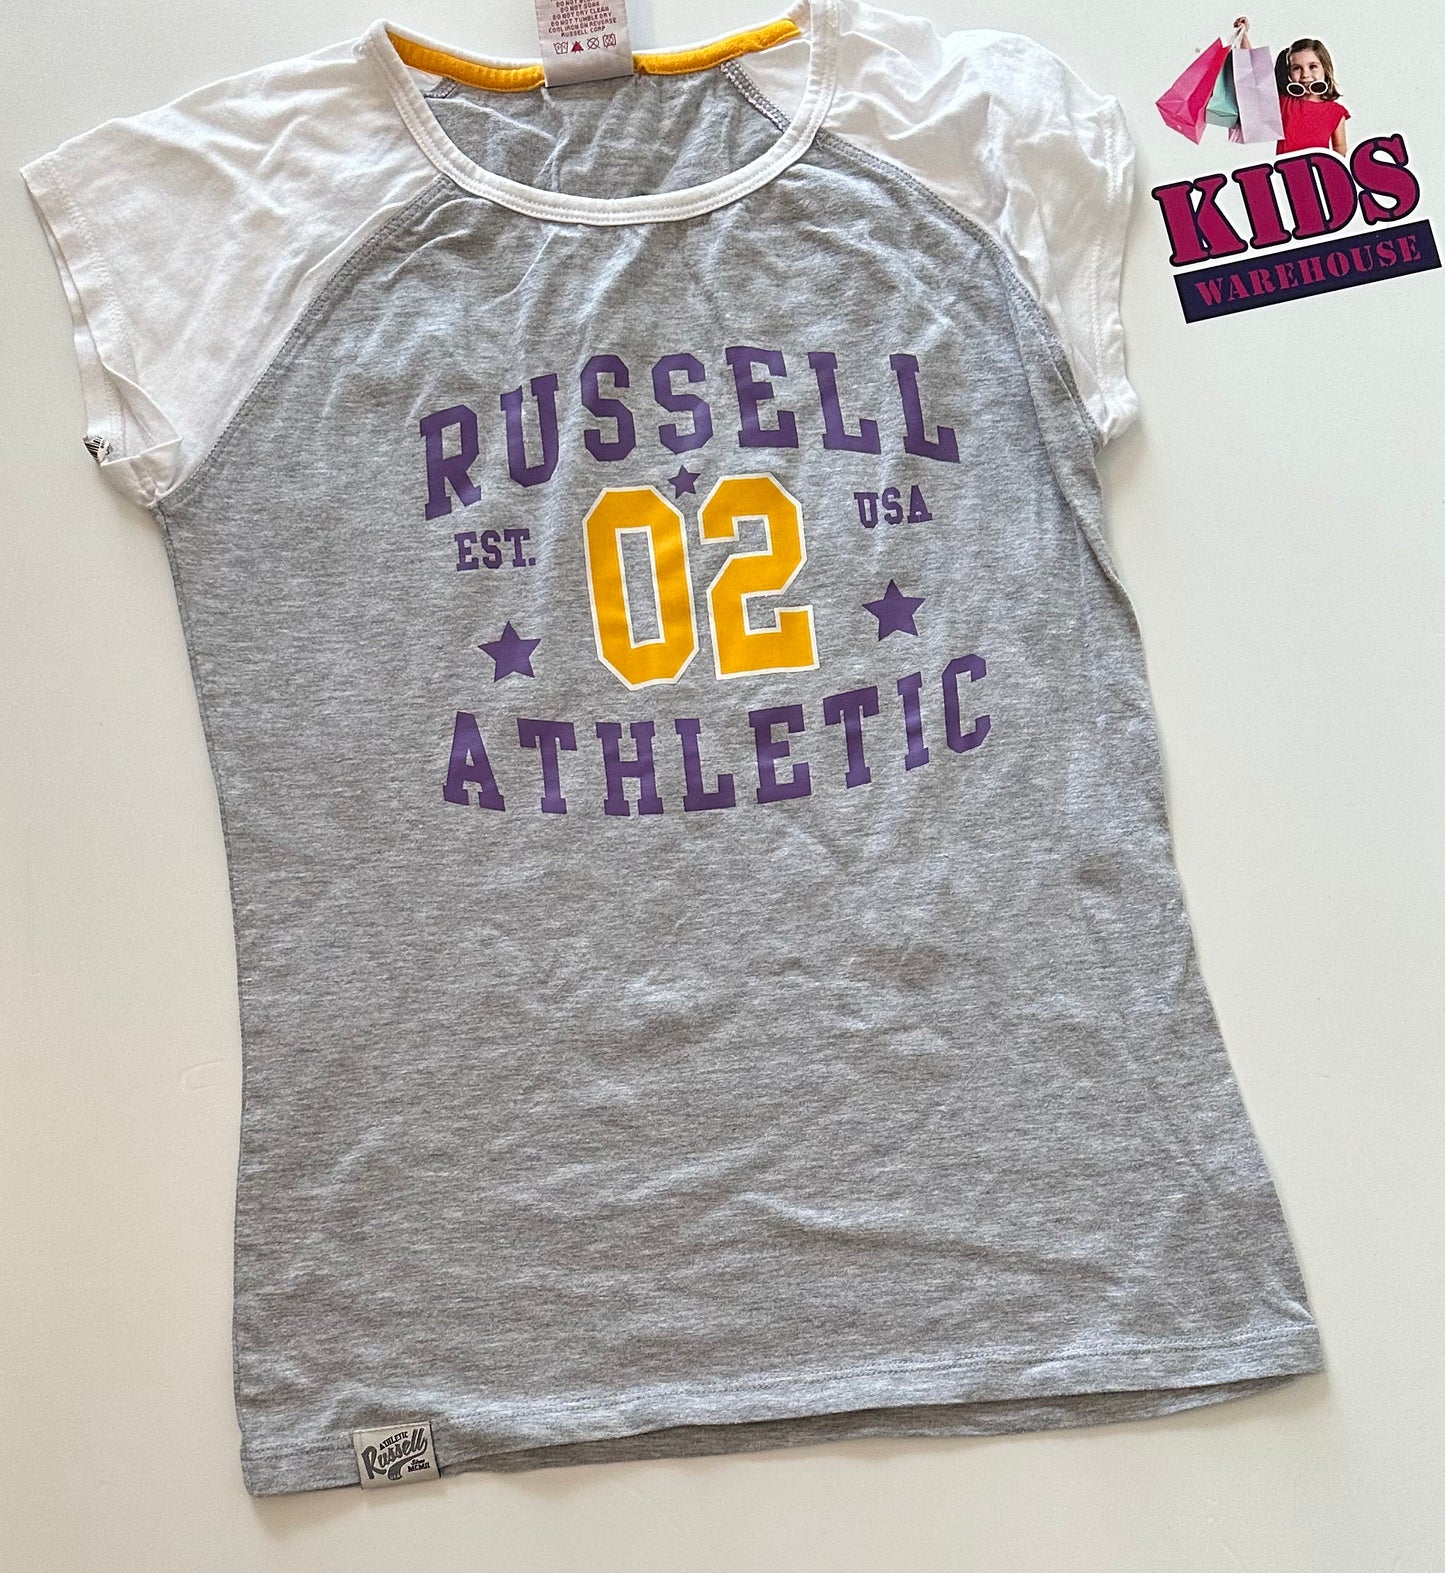 Russell Athletic Top Size 12